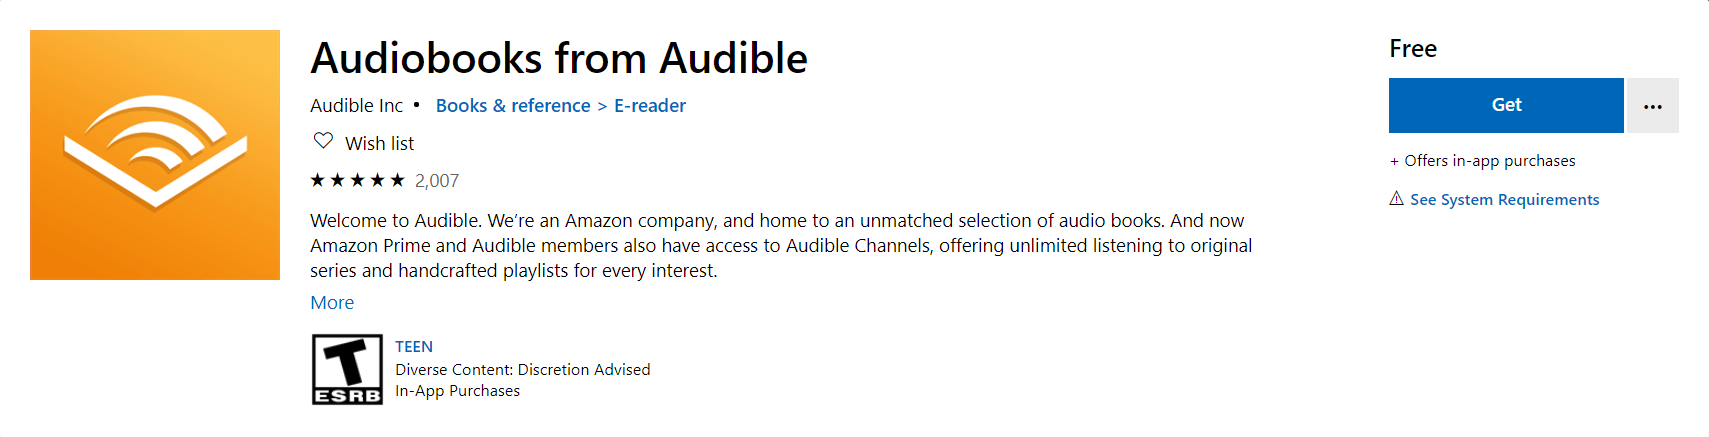 Download Audible App on Windows 10 to Split an Audiobook into Chapters